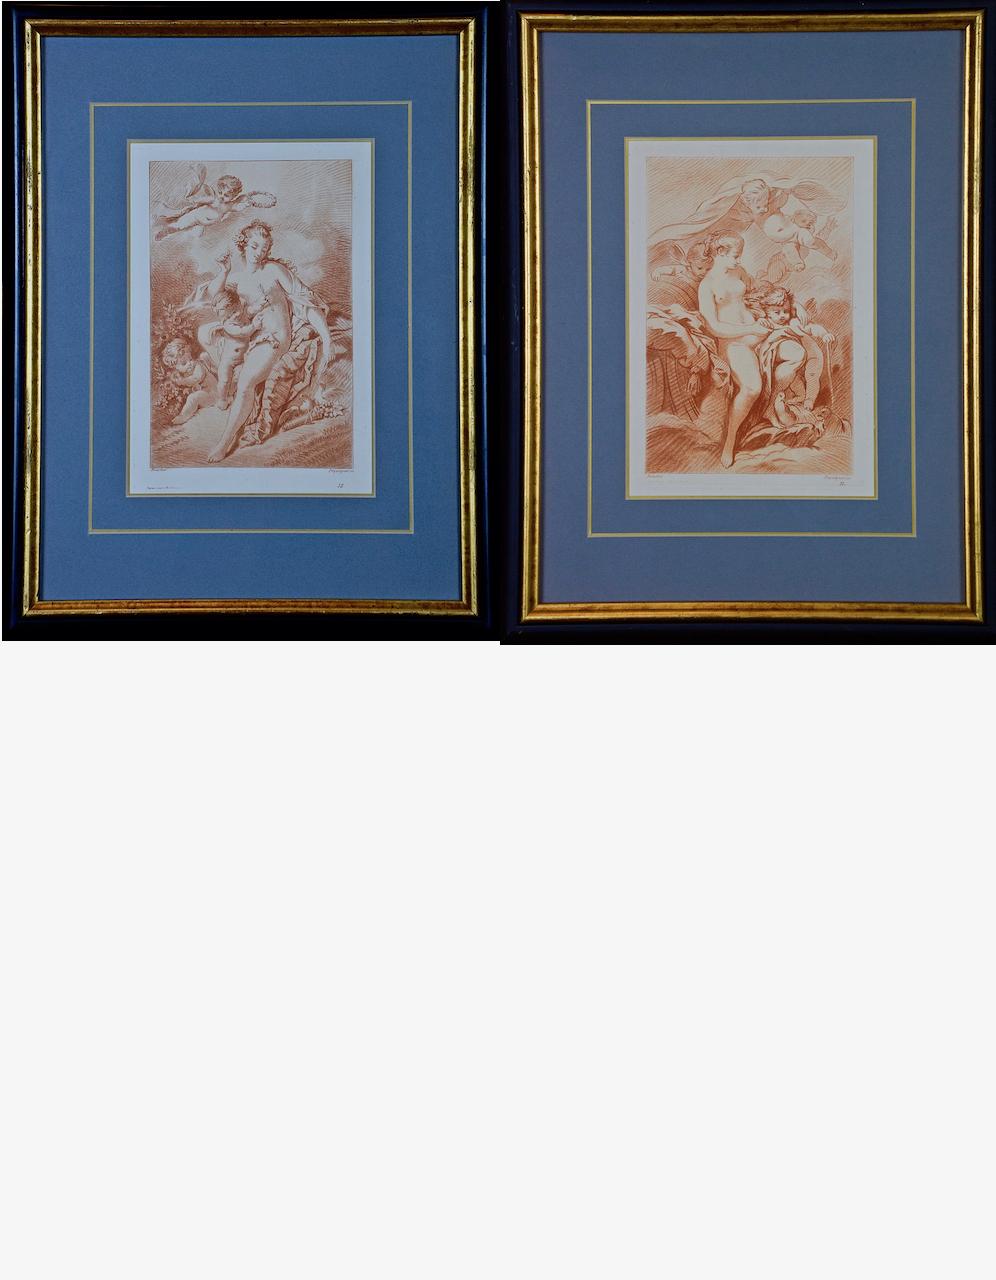 (After) Francois Boucher Figurative Print - A Pair of Romantic Etchings of Women with Cherubs by Pequegnot after Boucher 